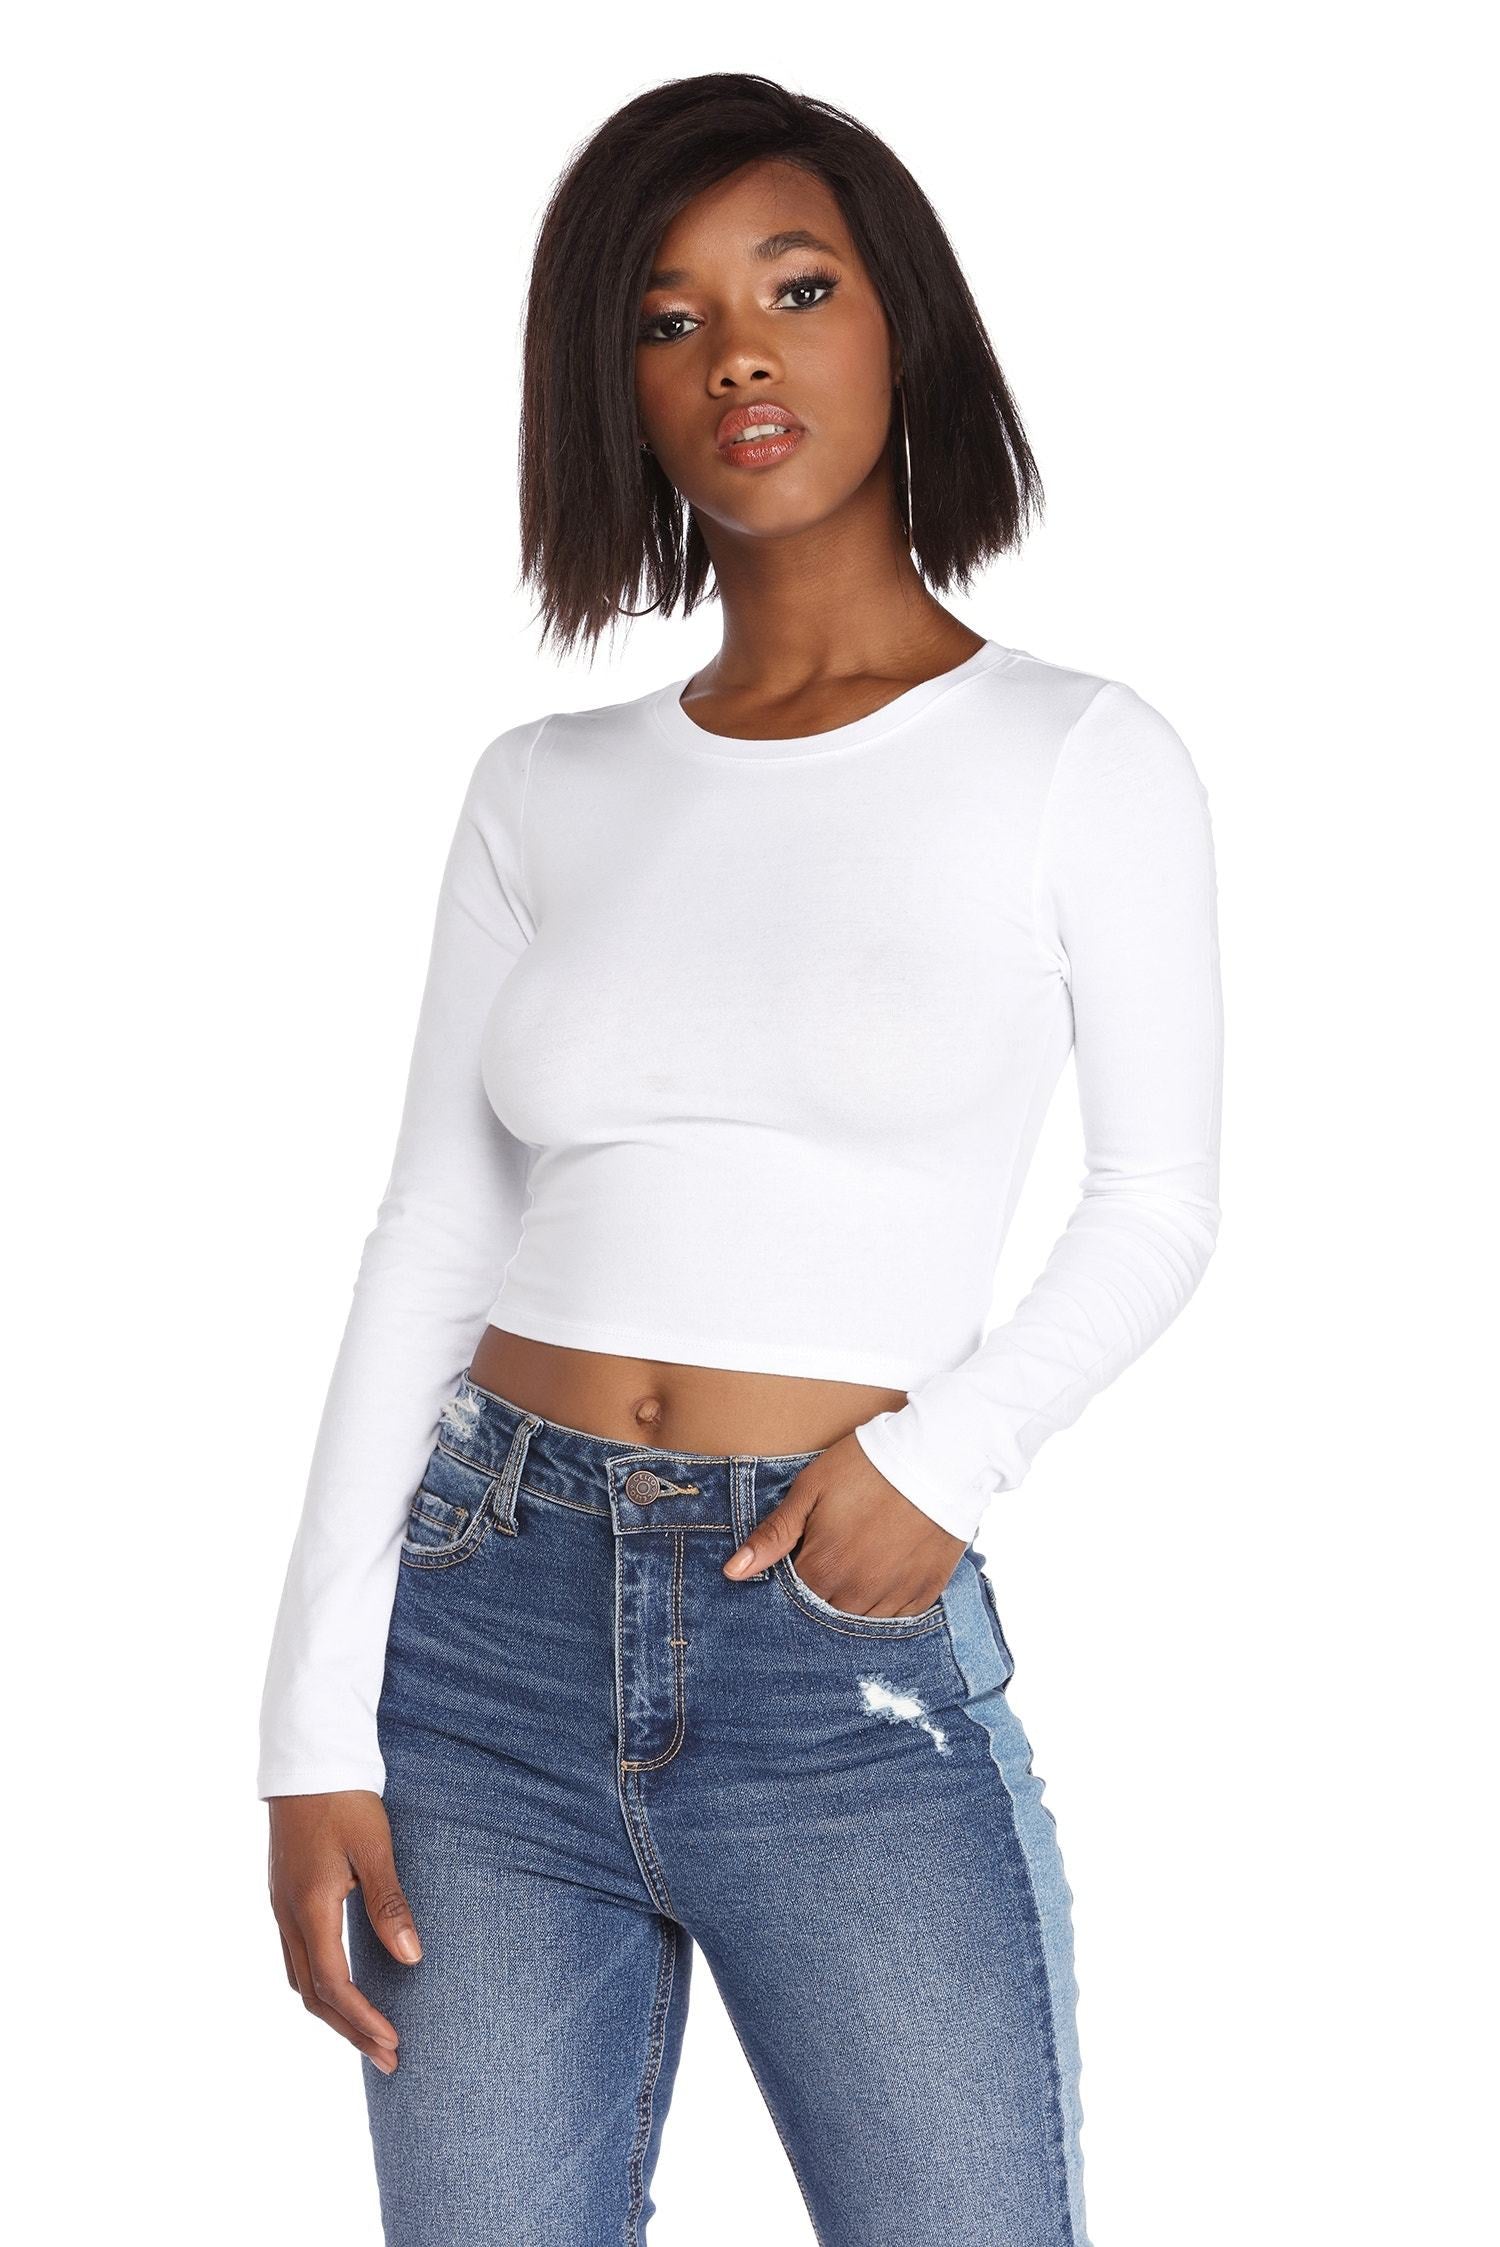 Hit The Basics Crop Top - Lady Occasions